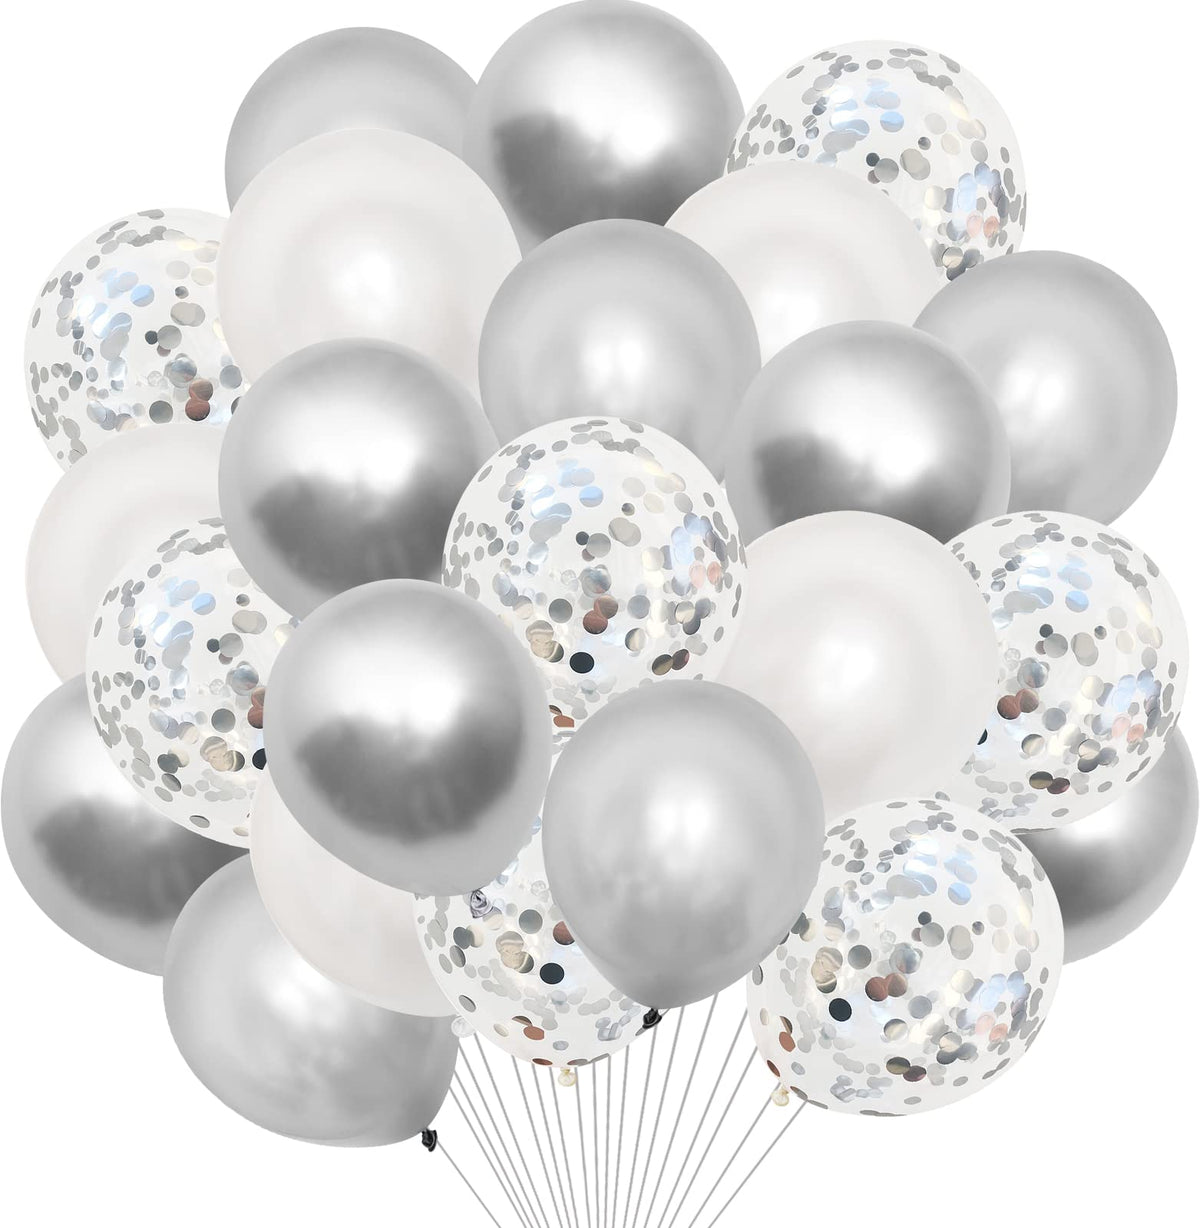 Silver Balloons, 40Pcs 12Inch Metallic Silver White Helium Balloons & Silver Confetti Balloons with Ribbons Glue Dots for Birthday Wedding Baby Shower Engagement Graduate Anniversary Party Decoration